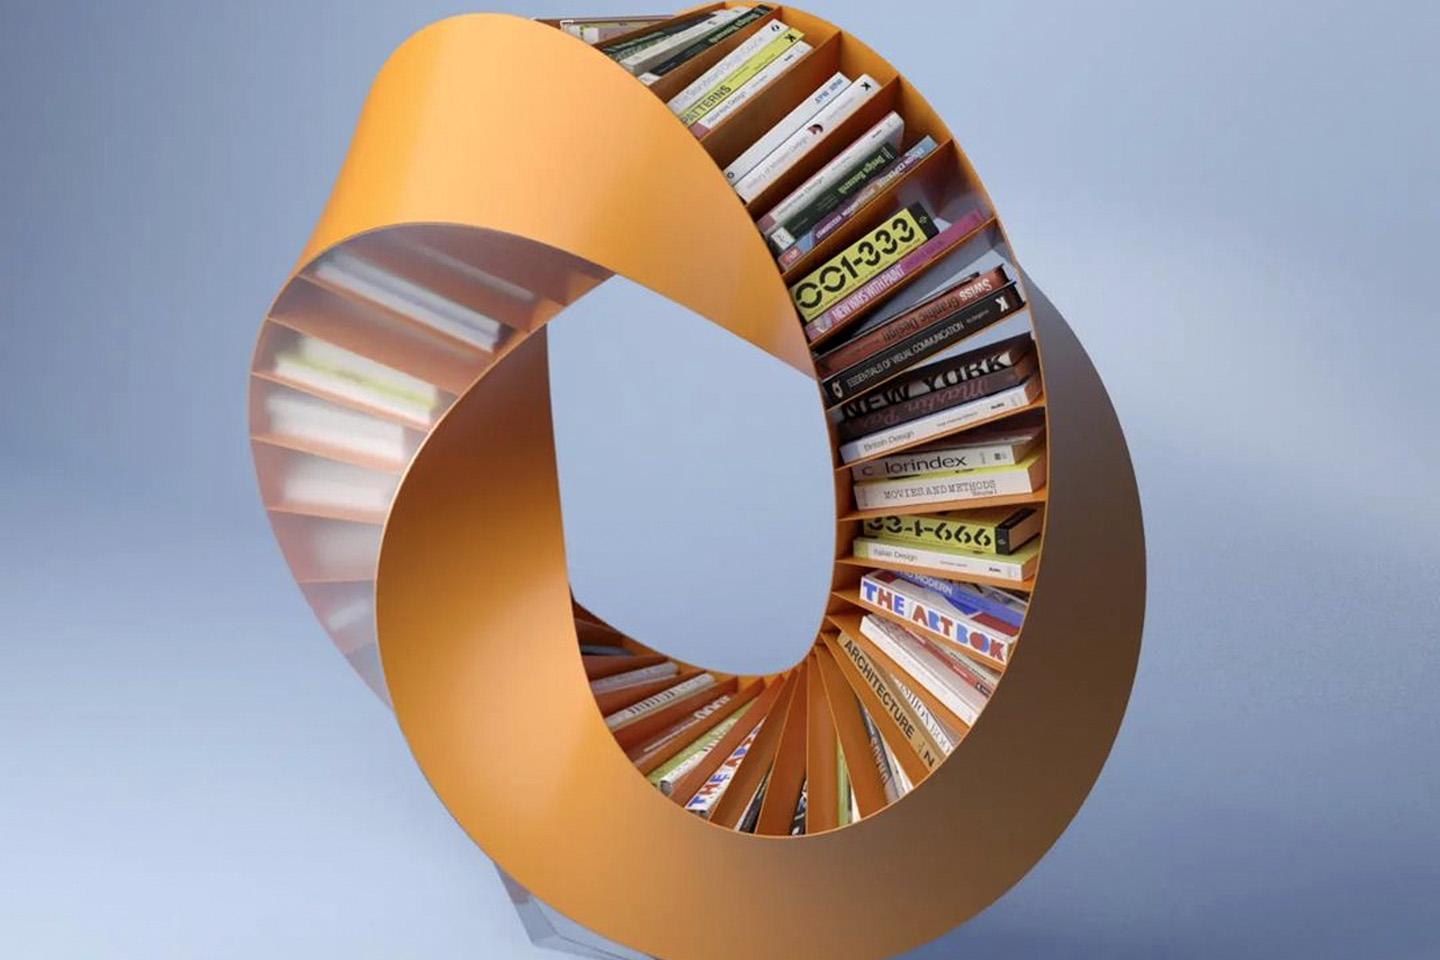 #This twisting sculptural furniture design provides a new identity to conventional bookshelves